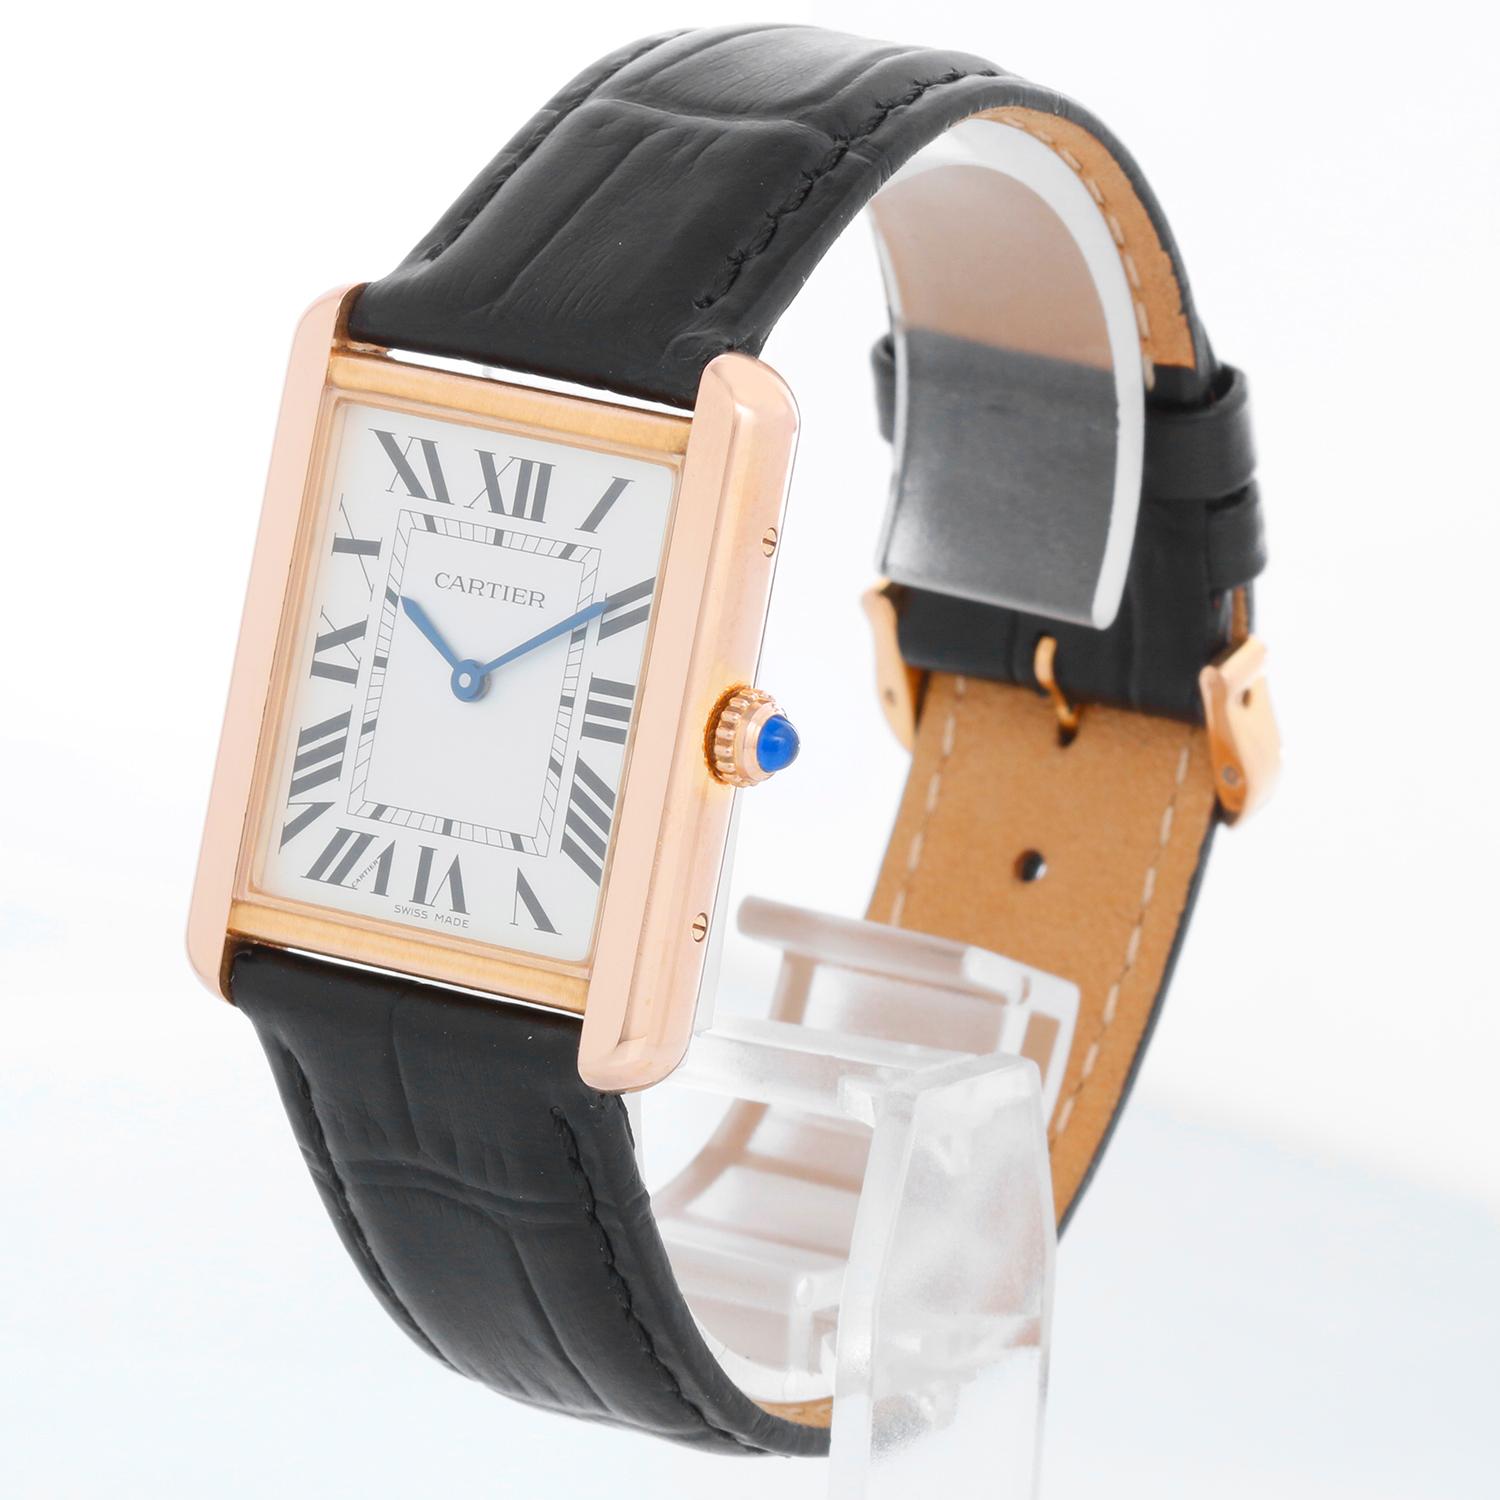 Cartier Tank Solo 18k Rose Gold Men's Watch W5200025 - Quartz movement. 18k Rose gold case with stainless steel back (27mm x 34mm). Silver dial with black Roman numerals. Black strap band with 18k yellow gold Cartier buckle. Pre-owned with custom